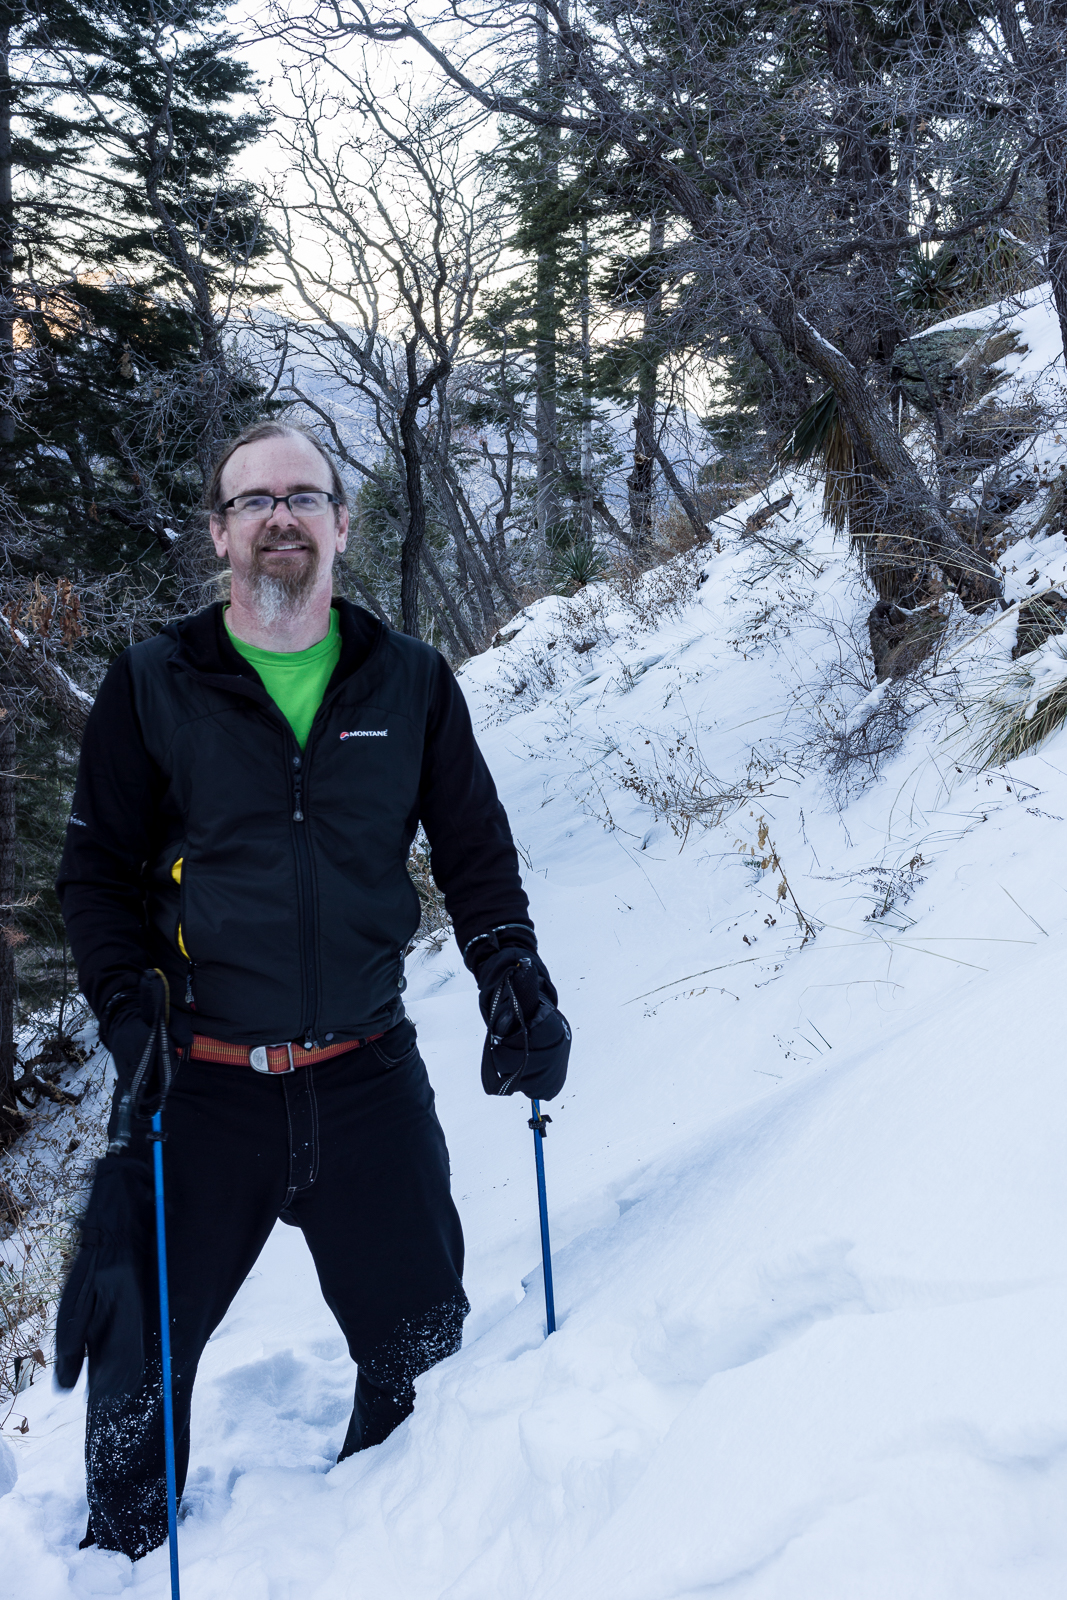 Enjoying the snow on the Butterfly Trail. December 2015.